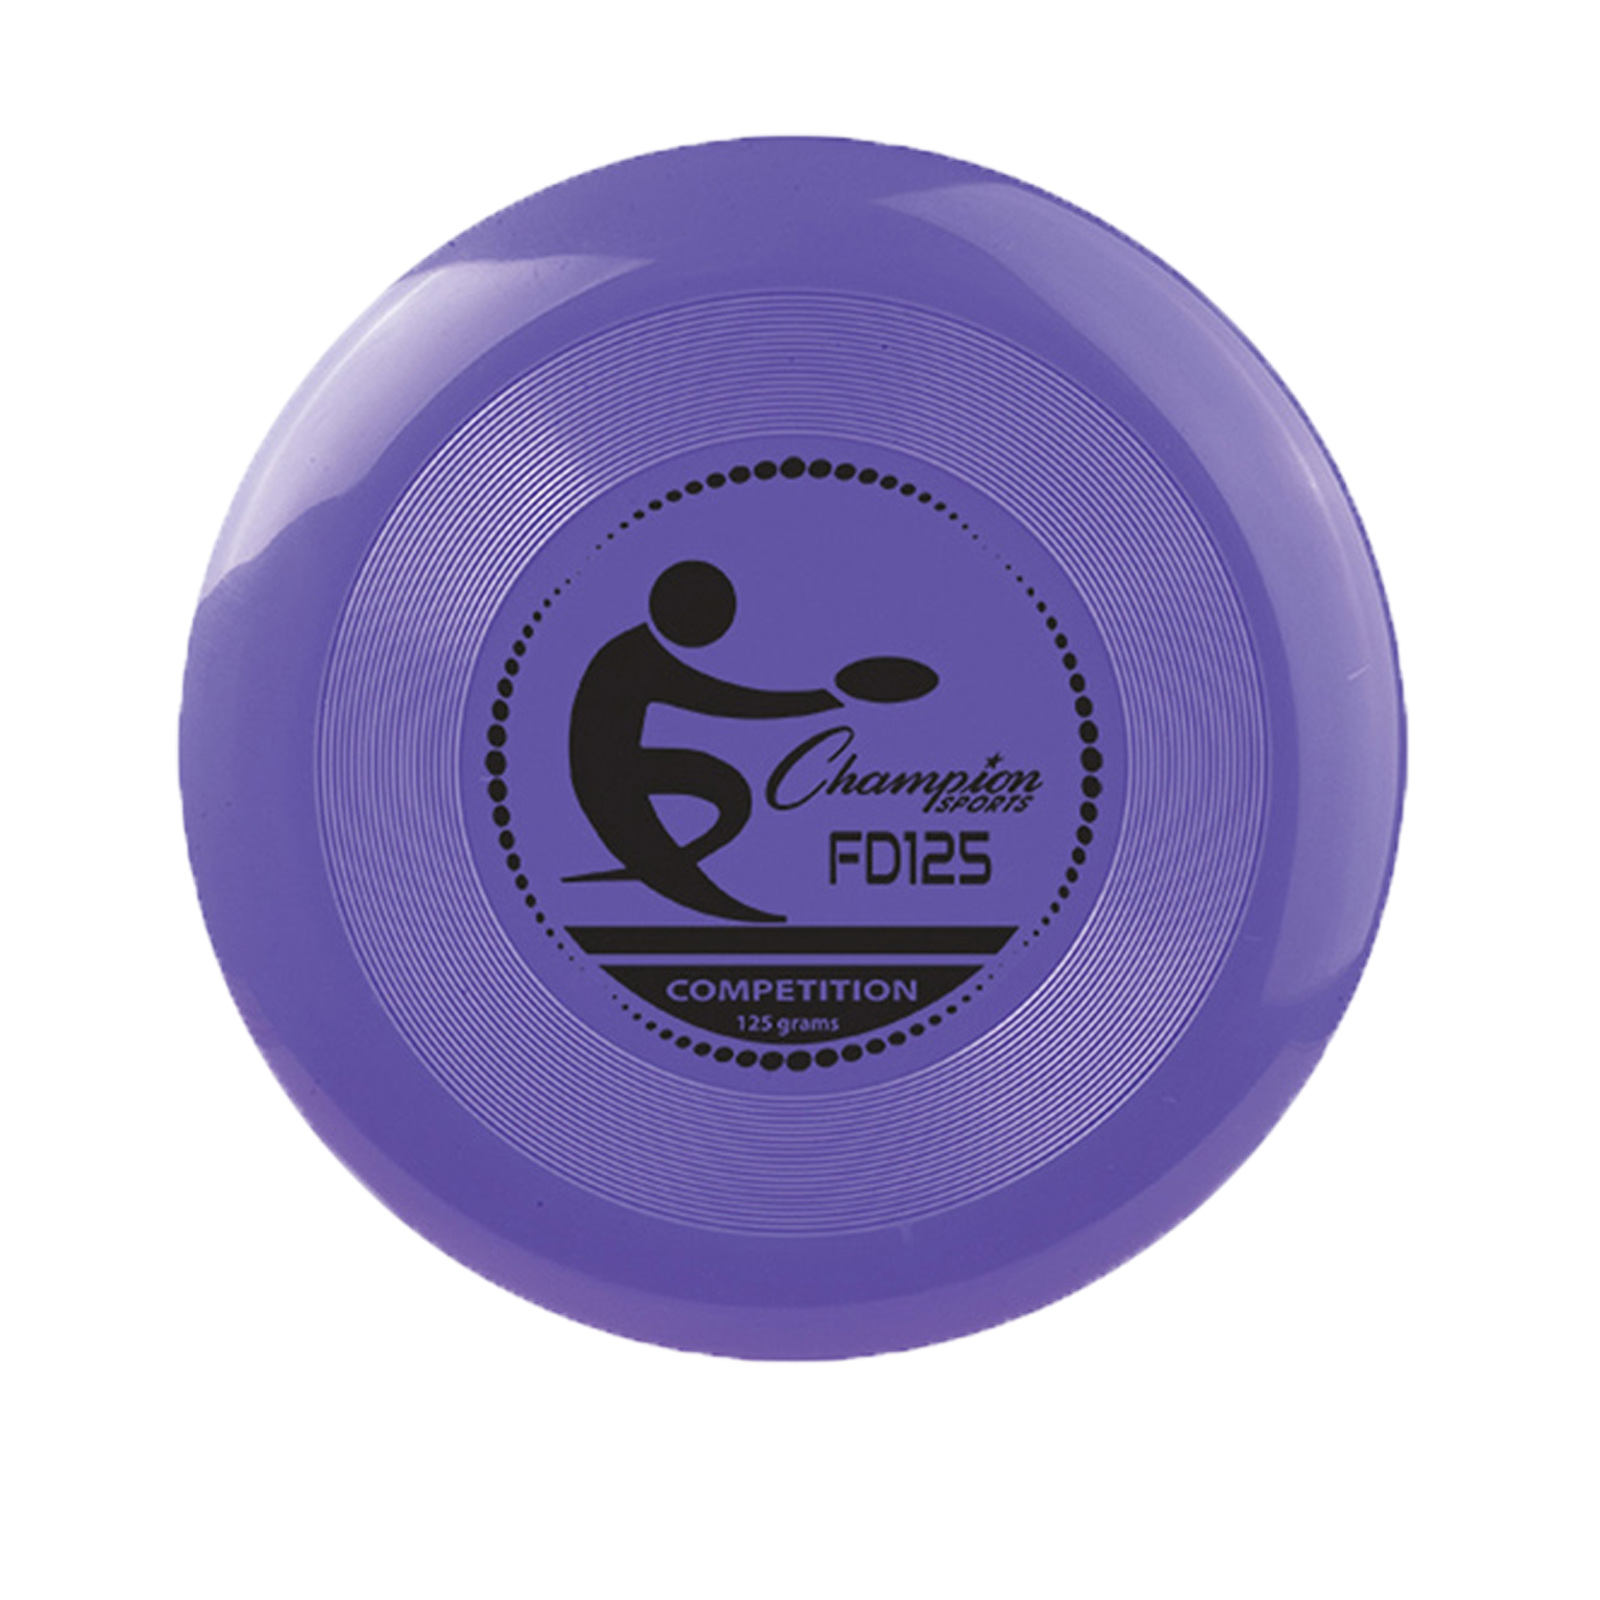 Plastic Competition Disc, 125g, Assorted Colors